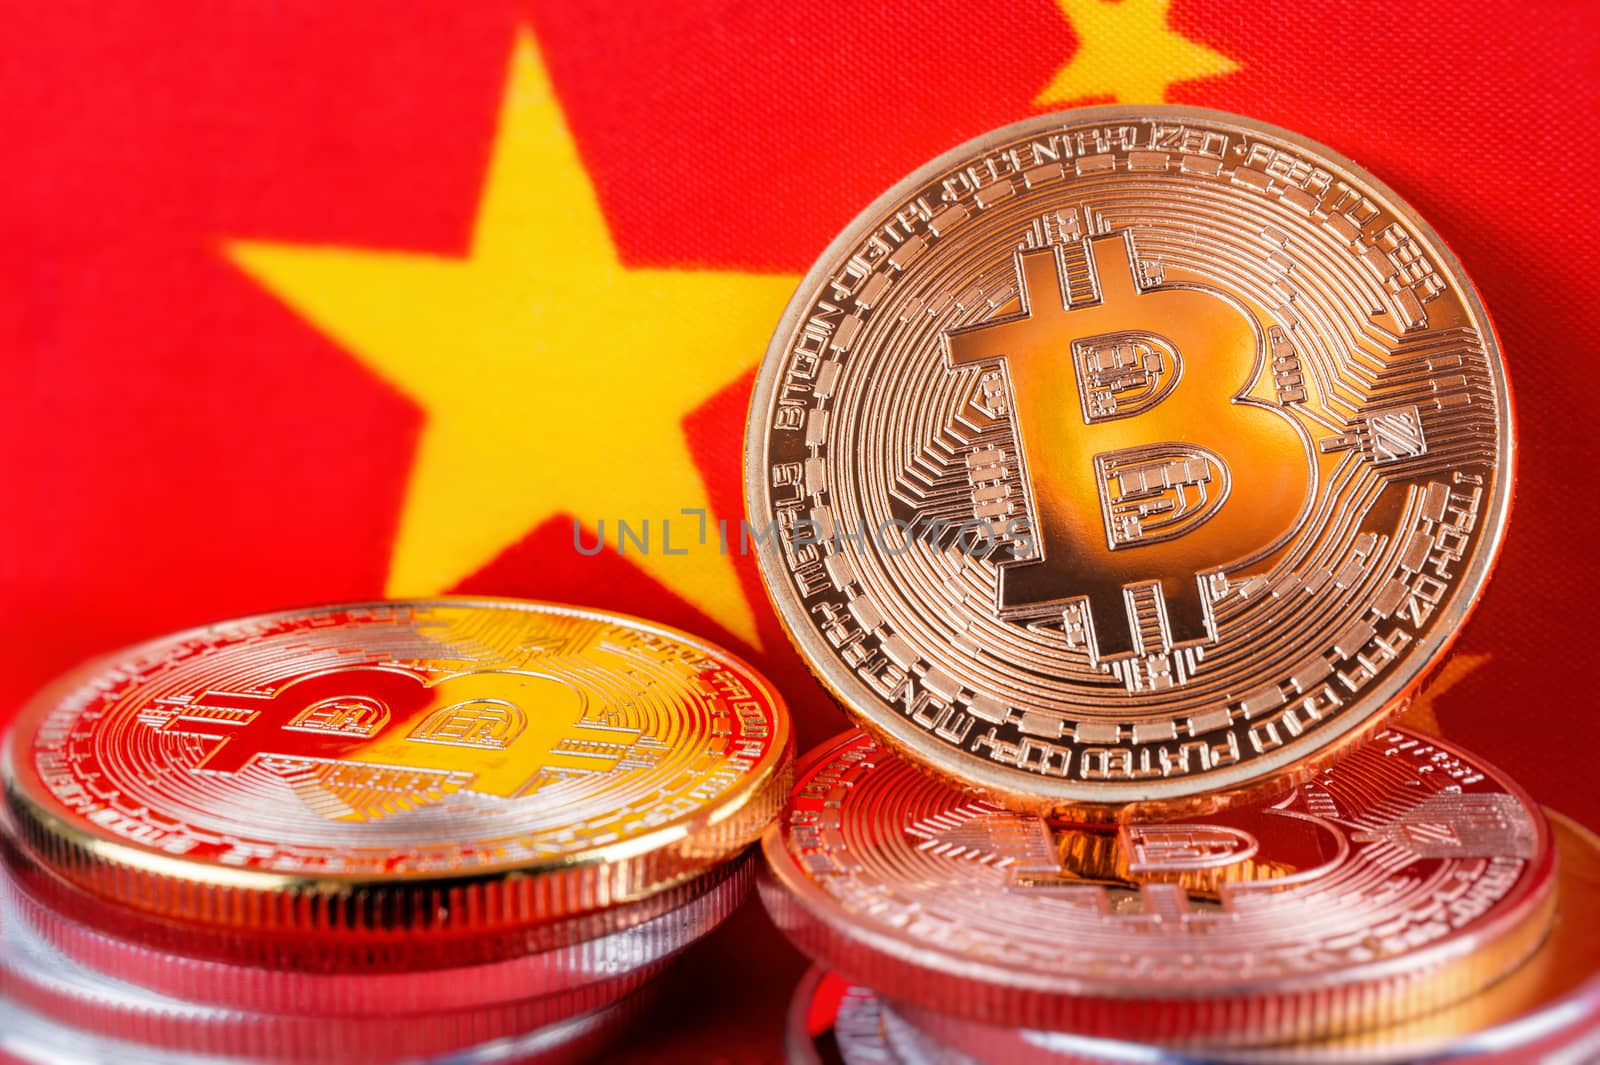 Bitcoin real coins over chinese flag fabric